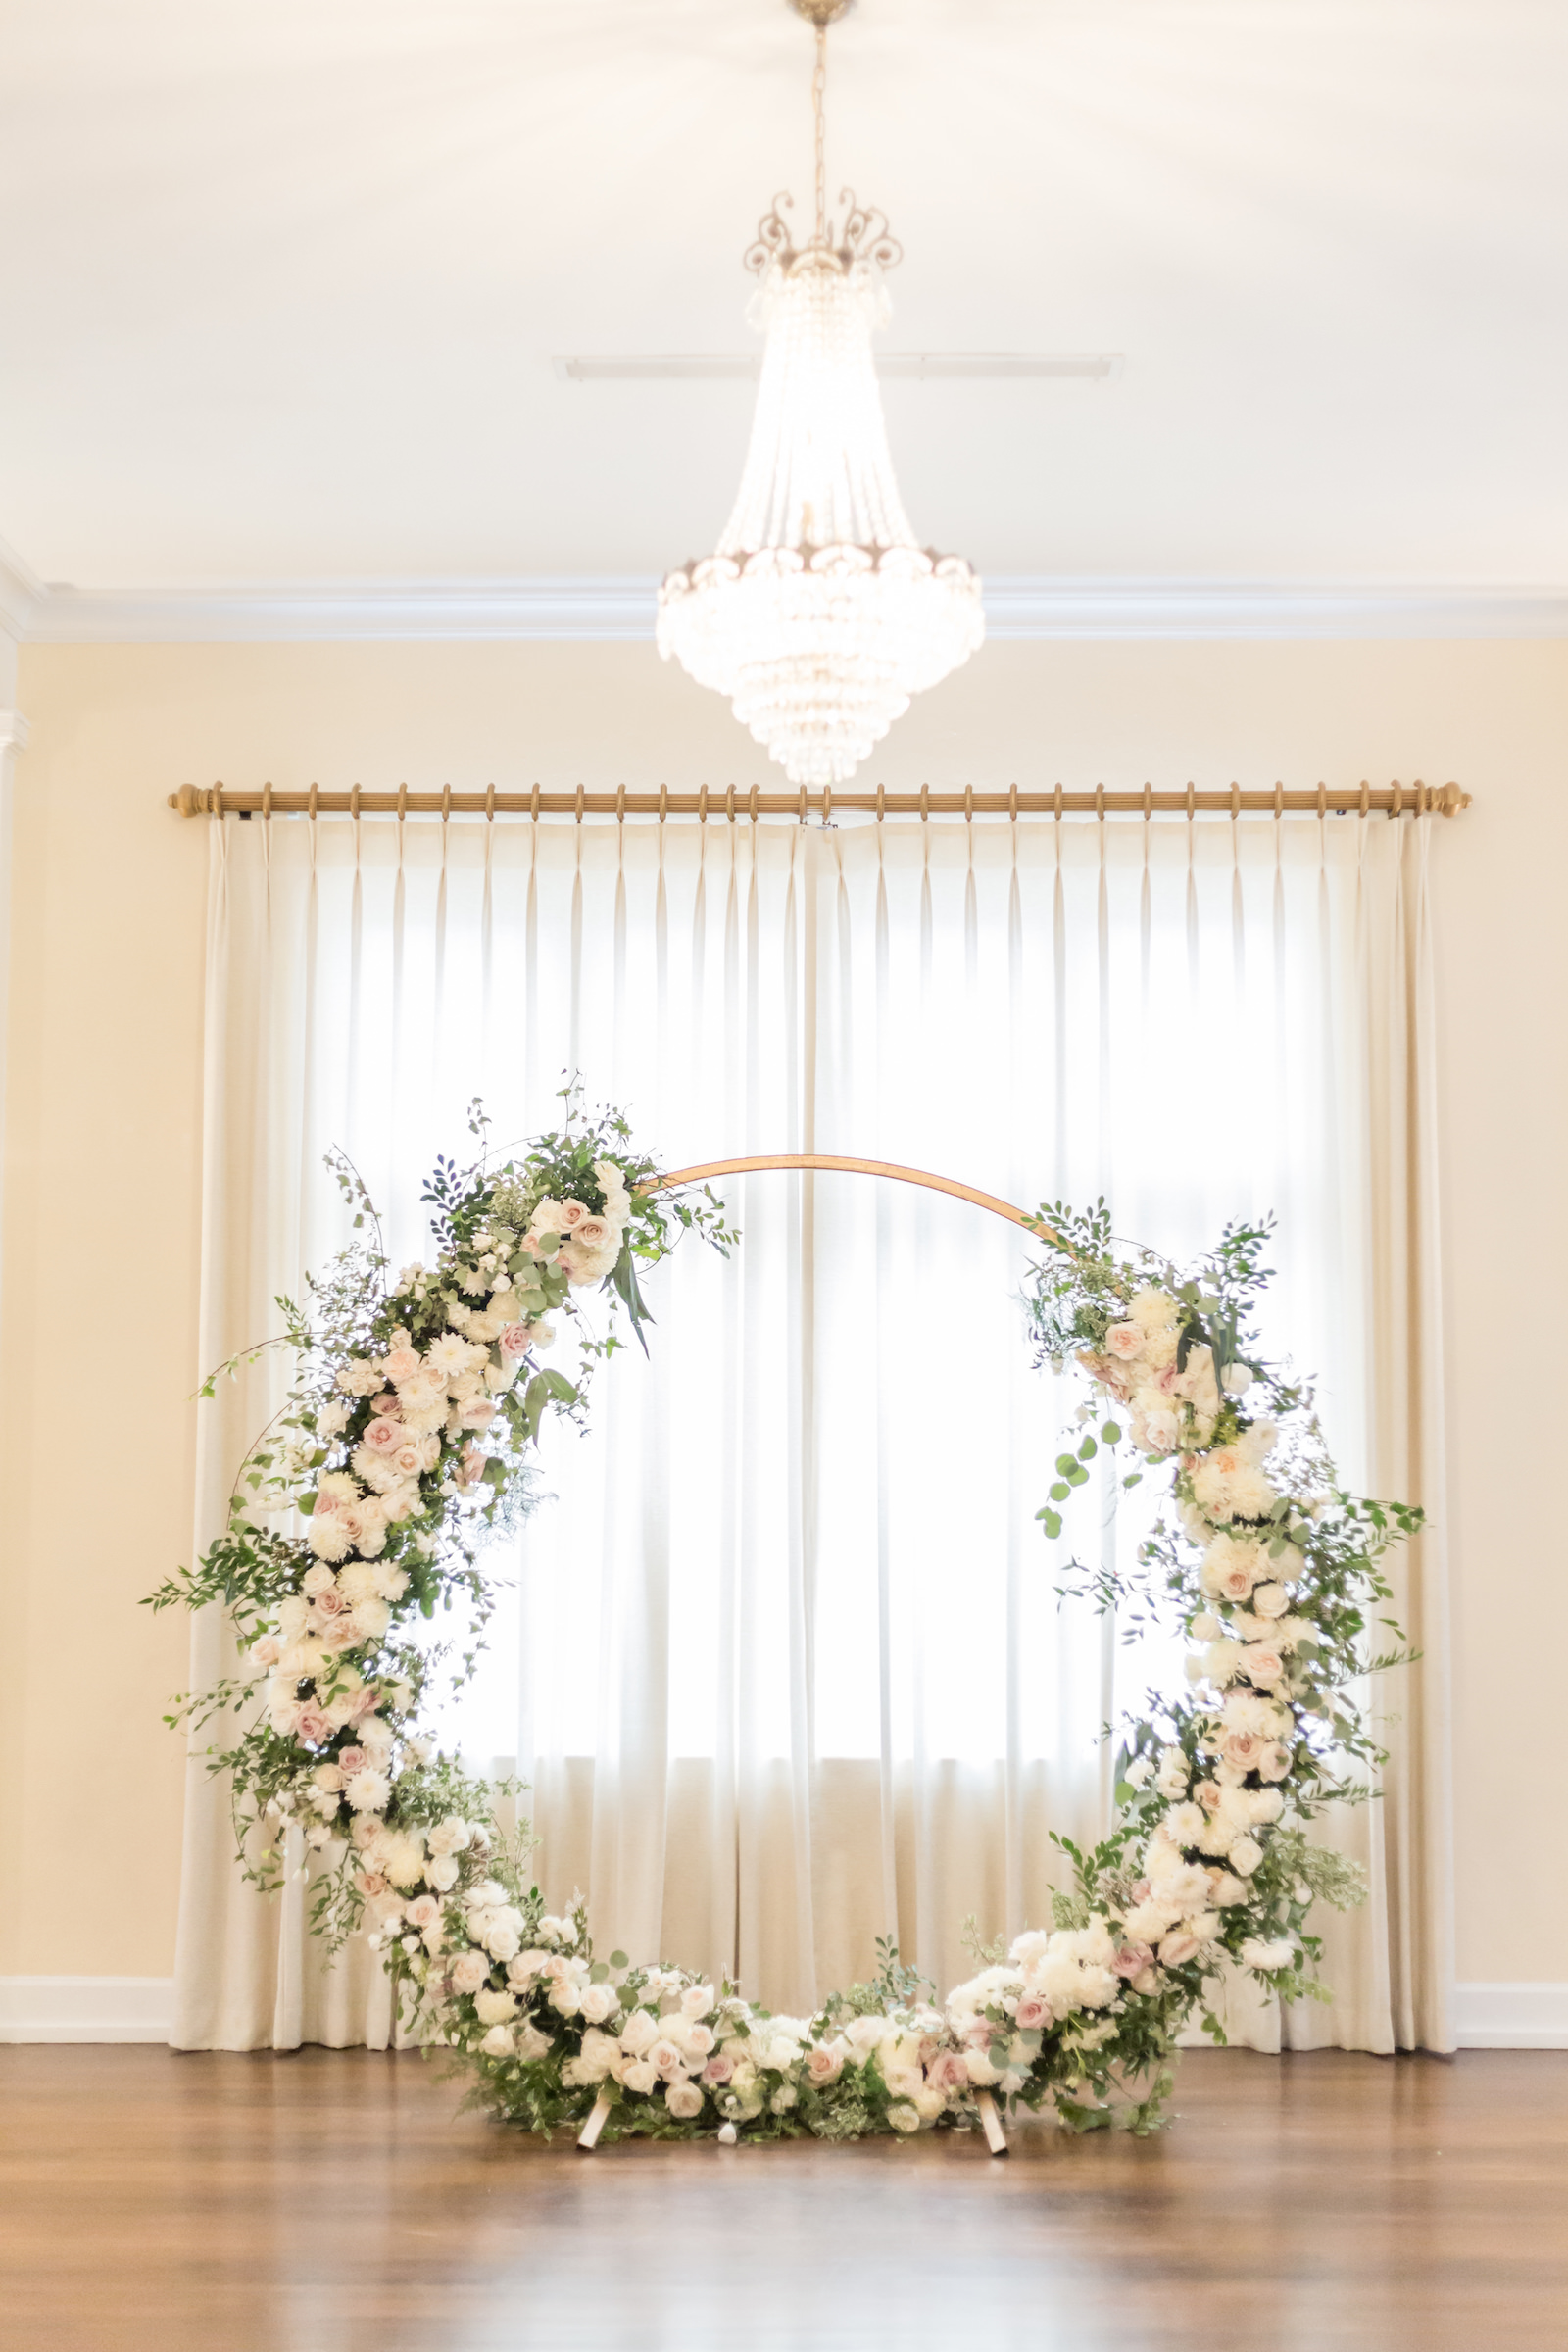 Classic and timeless lush white, blush pink roses floral arrangement on circular arch, eucalyptus and greenery | Tampa Bay wedding planner and designer Elegant Affairs by Design | Kate Ryan Event Rentals